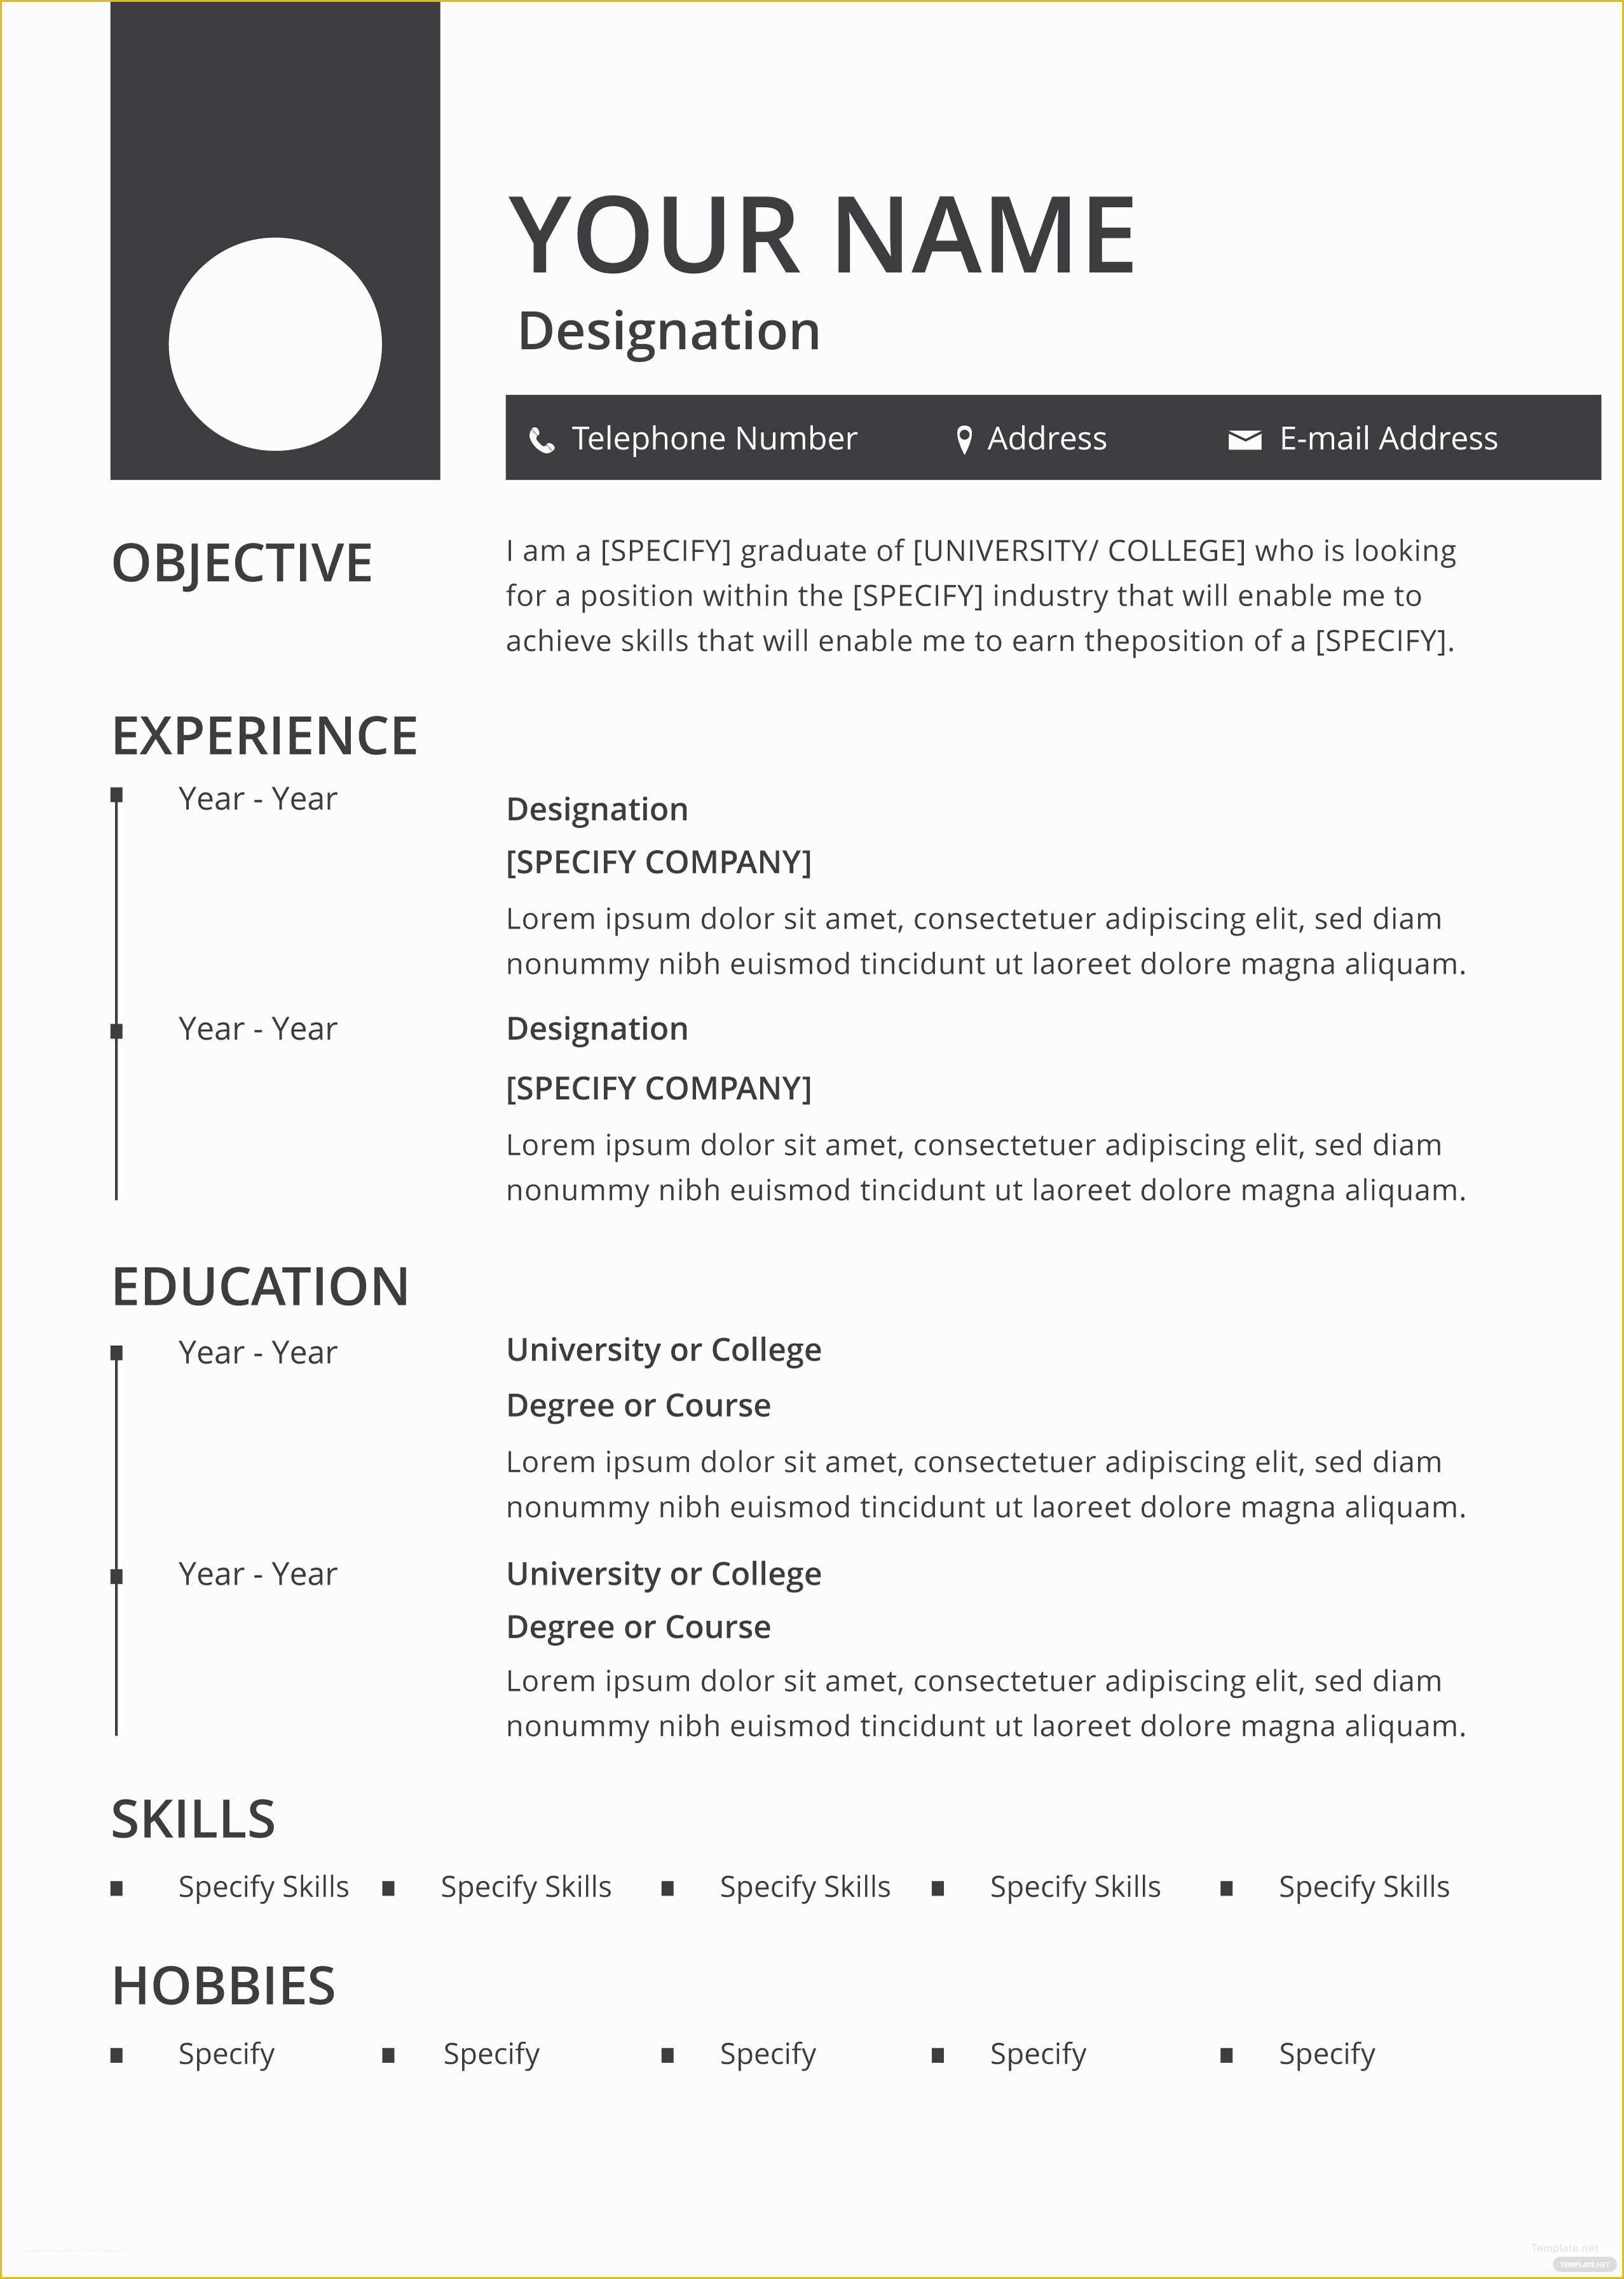 Free Cv Template Of Free Blank Resume and Cv Template In Adobe Shop